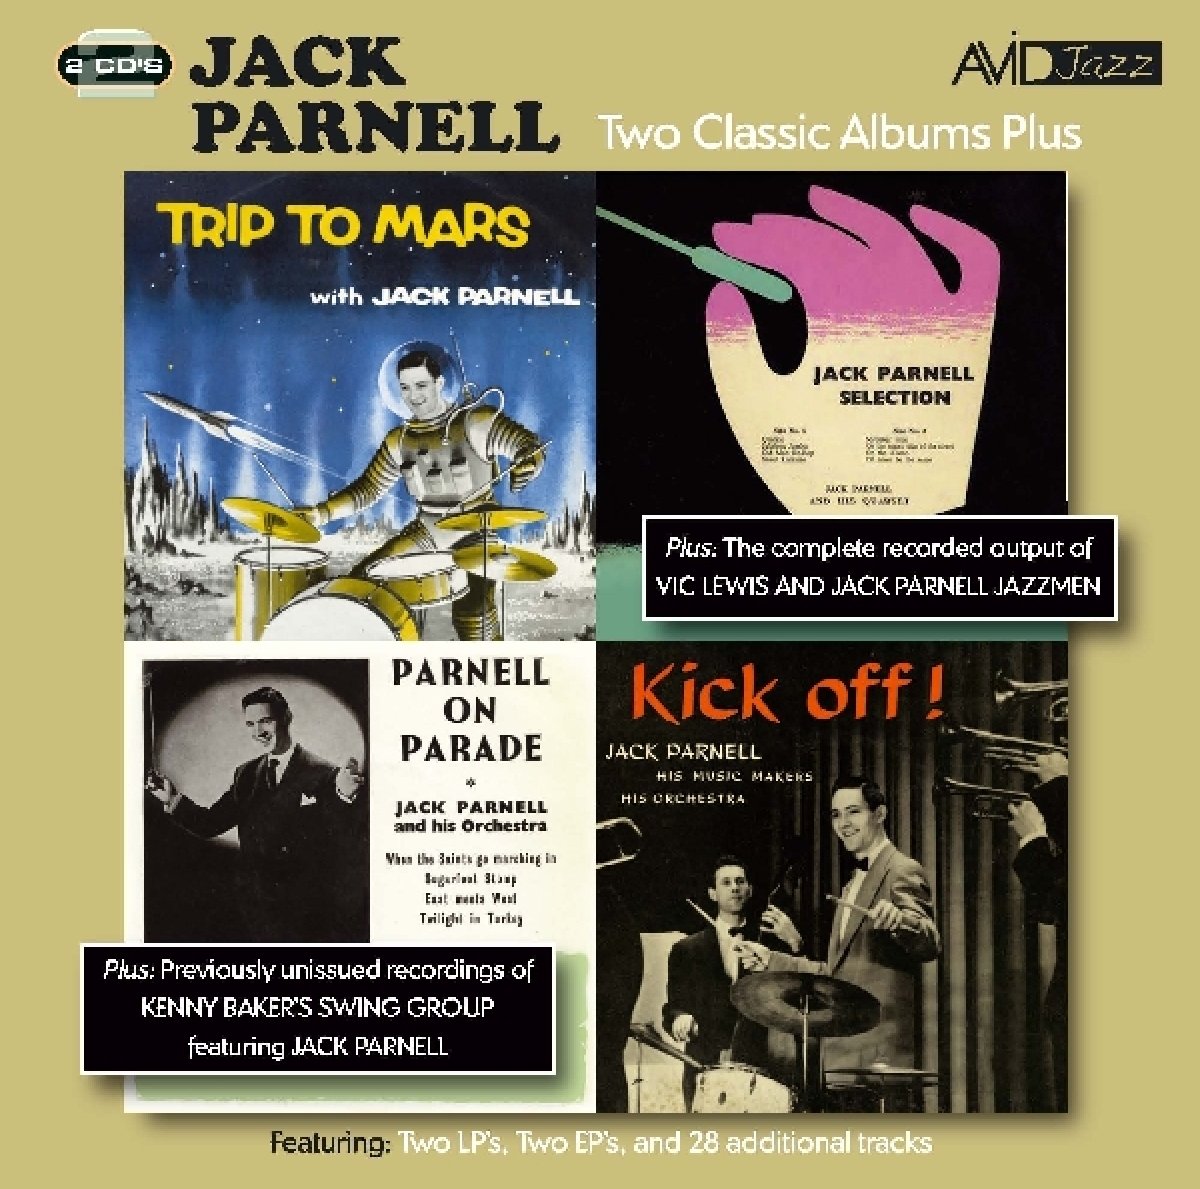 JACK PARNELL: TWO CLASSIC ALBUMS PLUS TWO EP’S (TRIP TO MARS / JACK PARNELL SELECTION / PARNELL ON PARADE / KICK OFF!) (2CD)